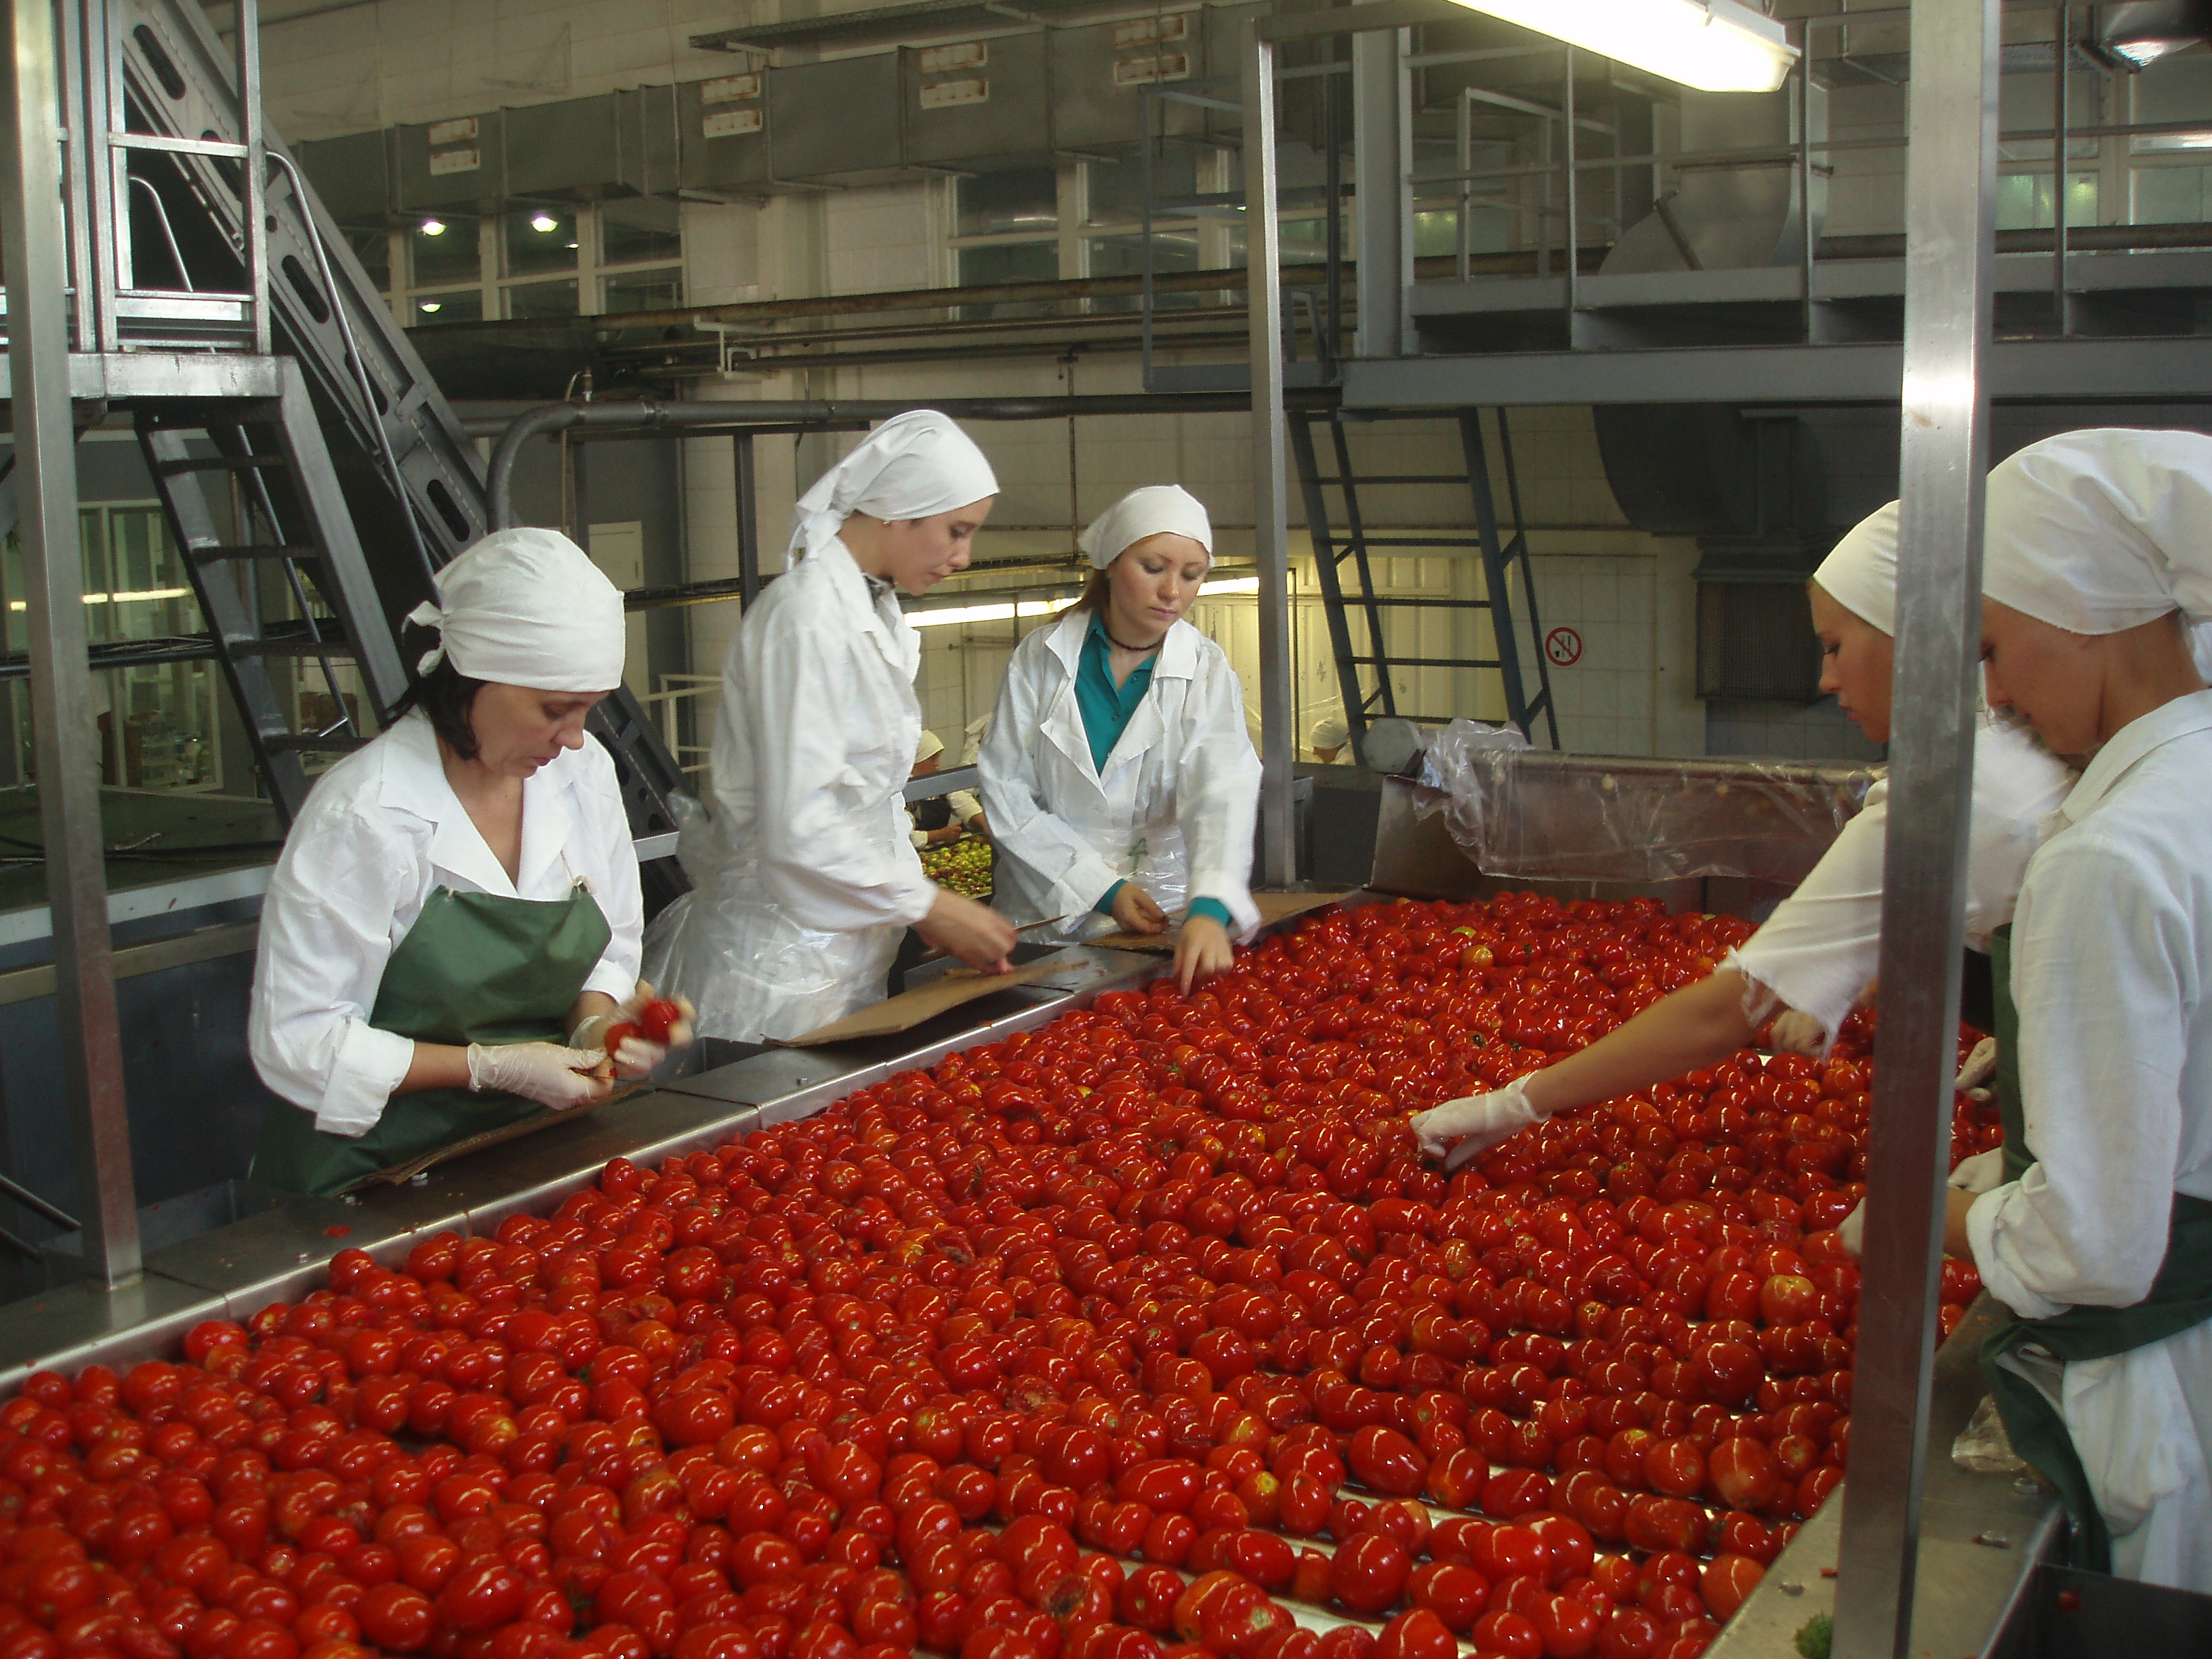 Women sorting tomatoes on a conveyor belt at an agricultural processing plant.  